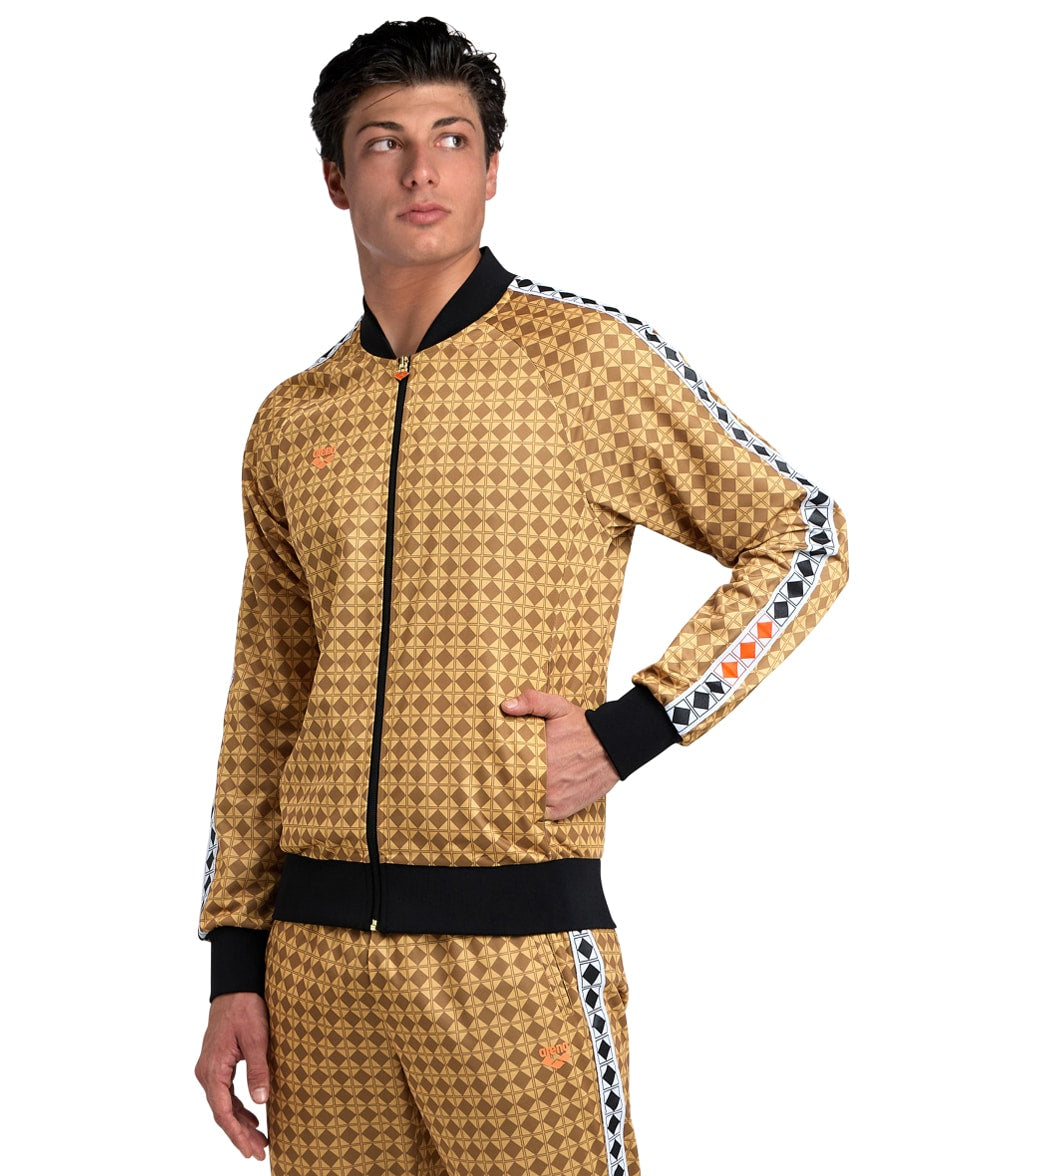 Arena Unisex 50th Anniversary Gold Relax IV Team Jacket